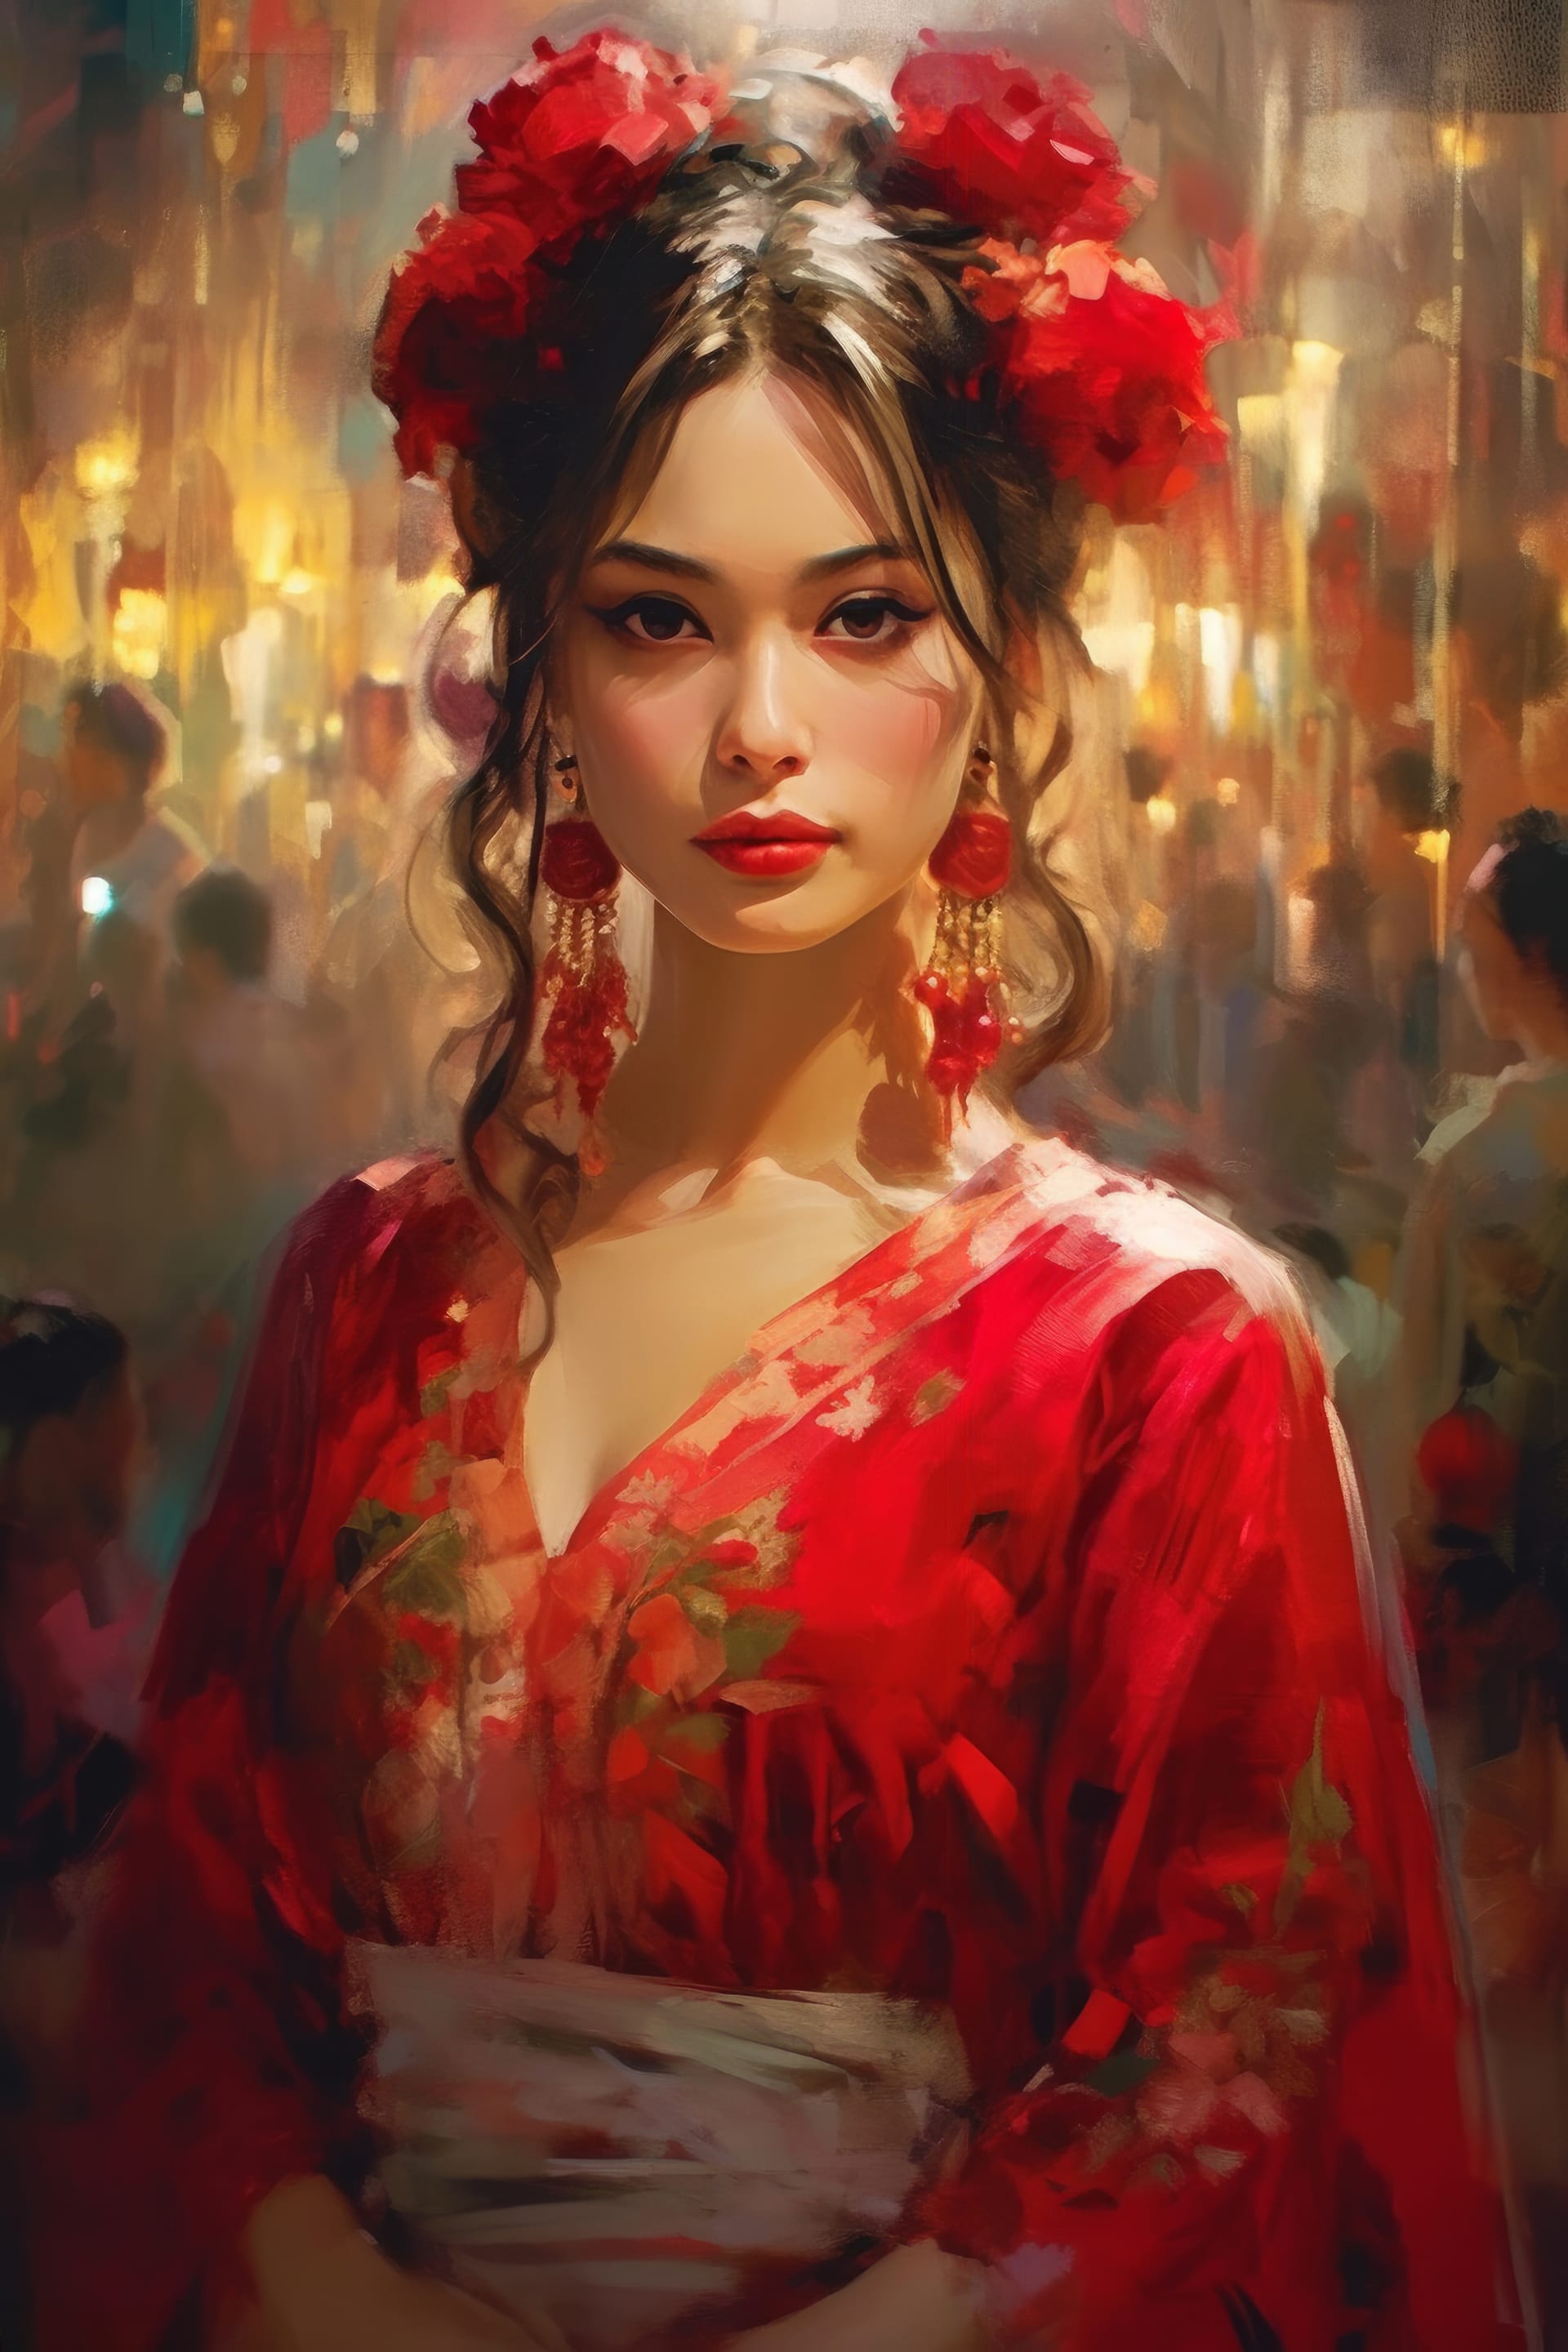 Painting woman red dress with flowers on her head